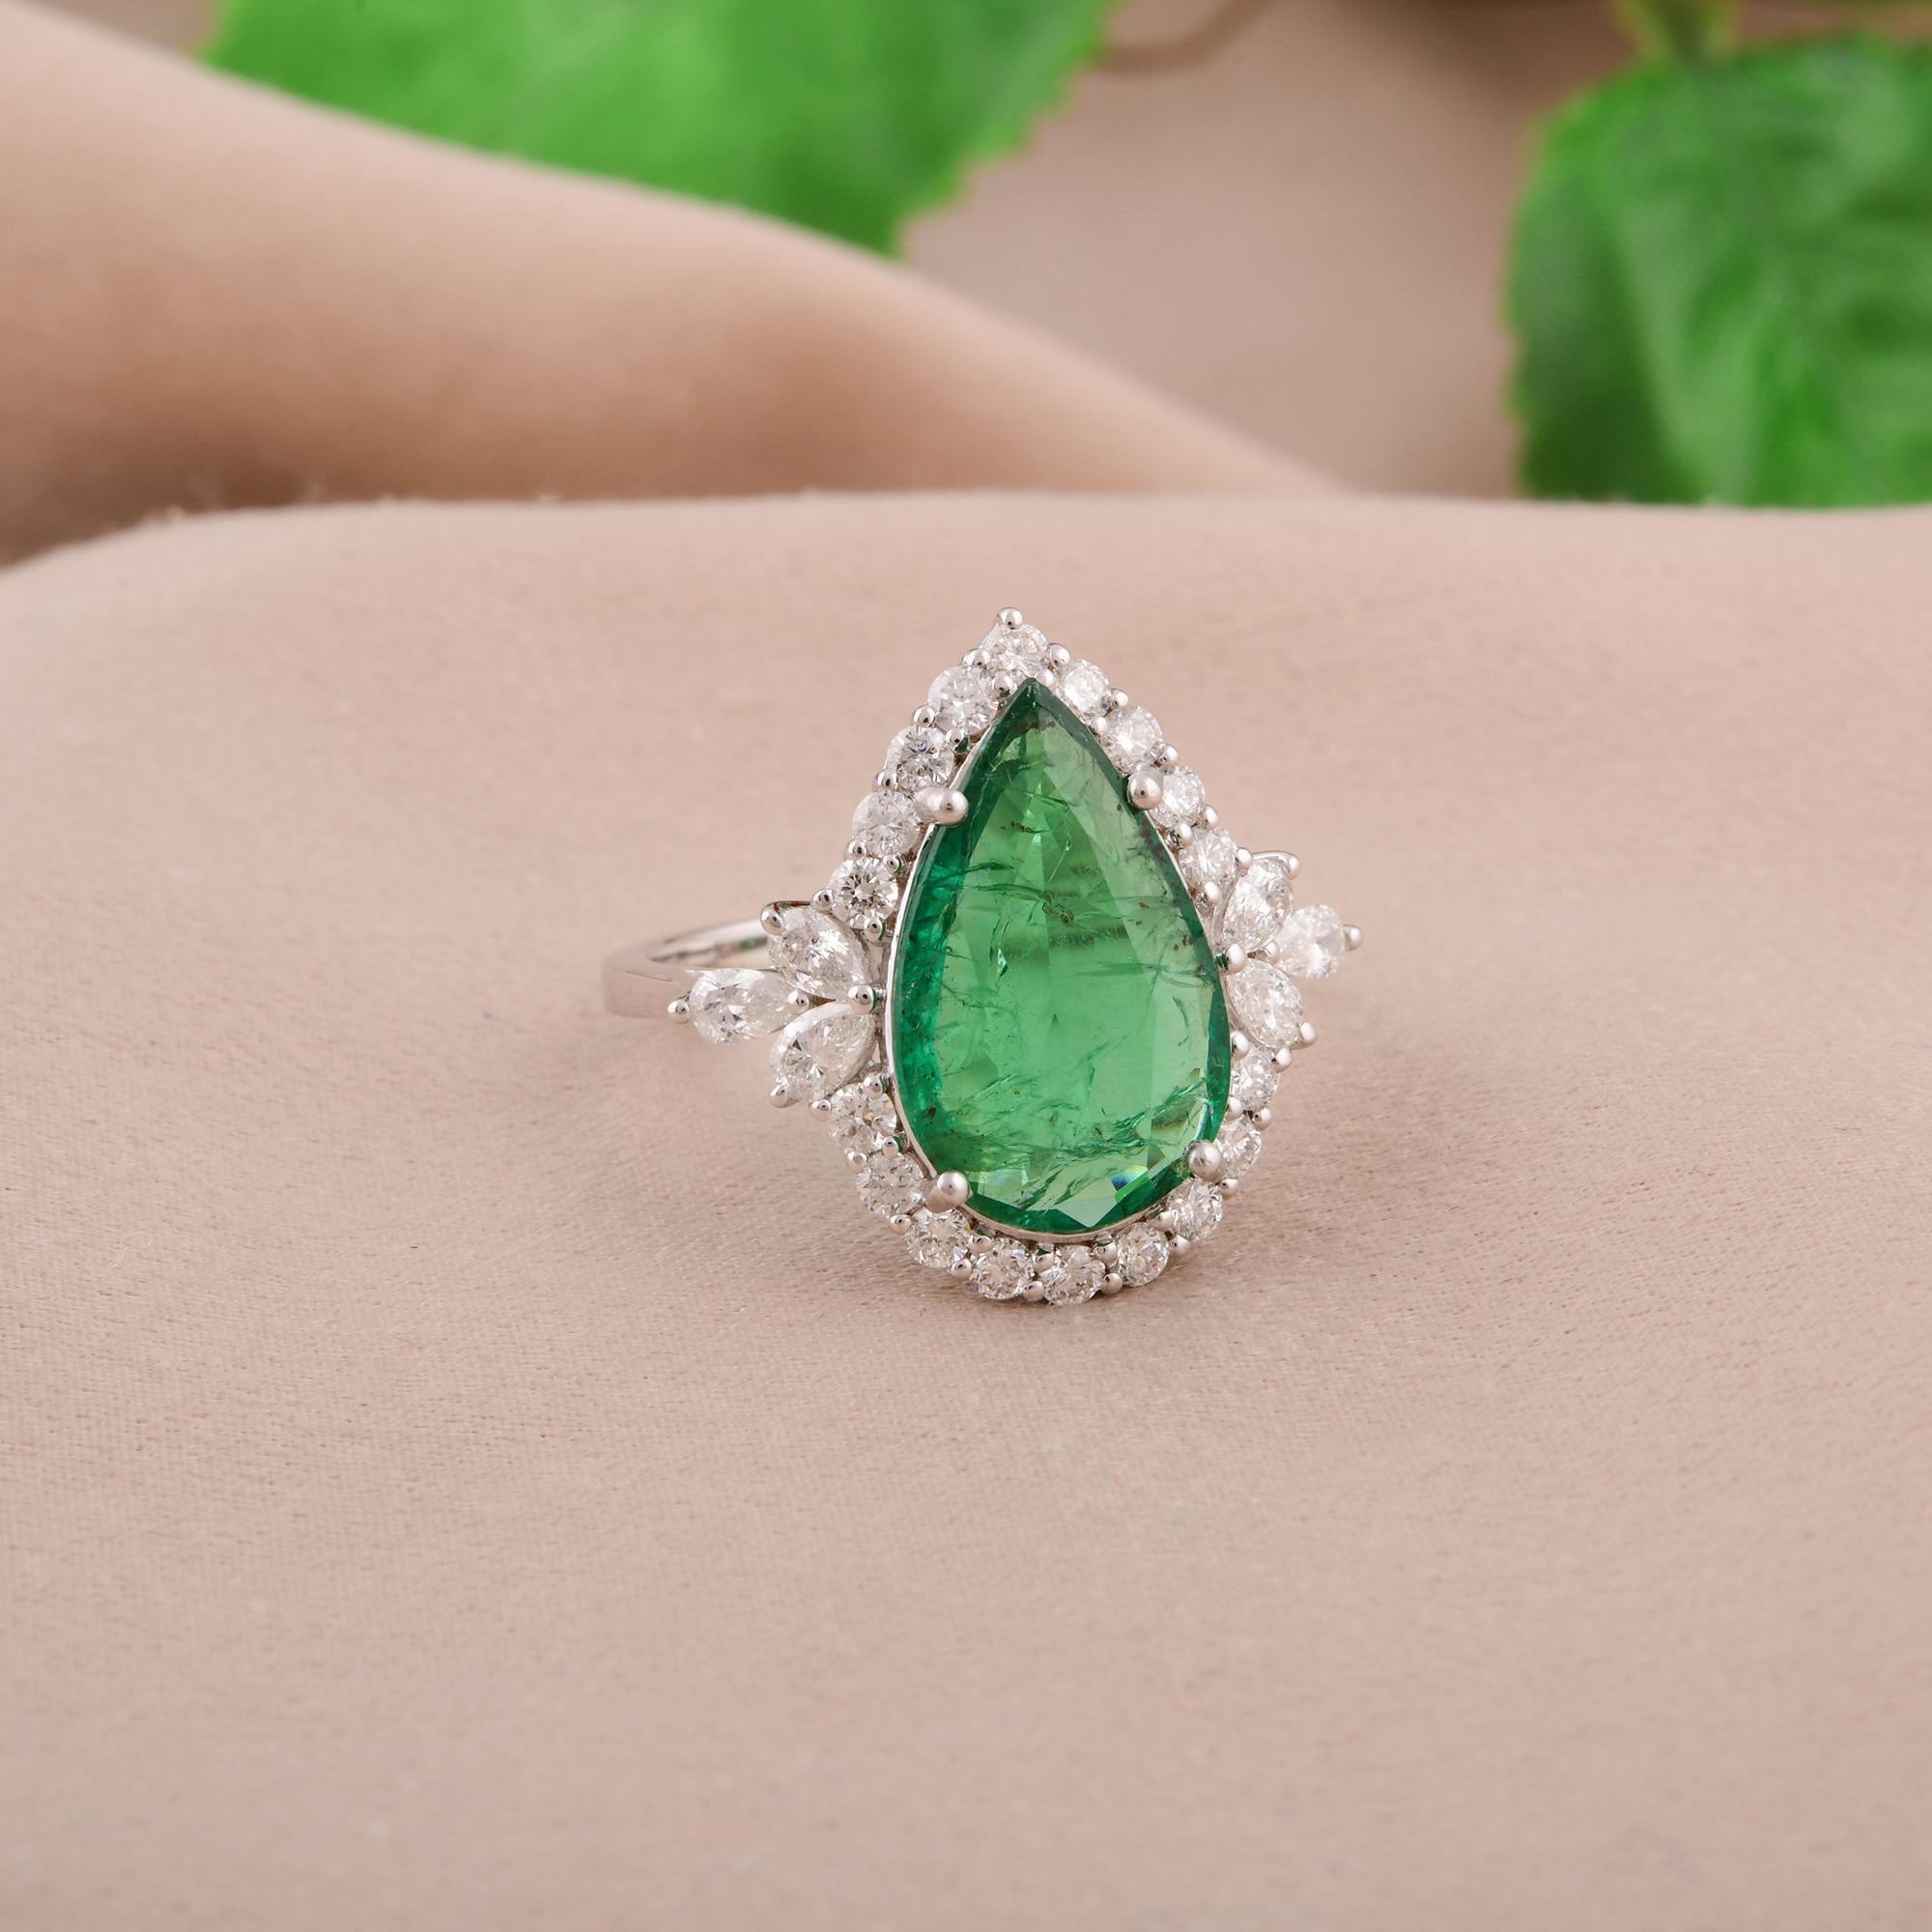 Pear Cut Natural Pear Emerald Gemstone Cocktail Ring Diamond Pave 18 Karat White Gold For Sale